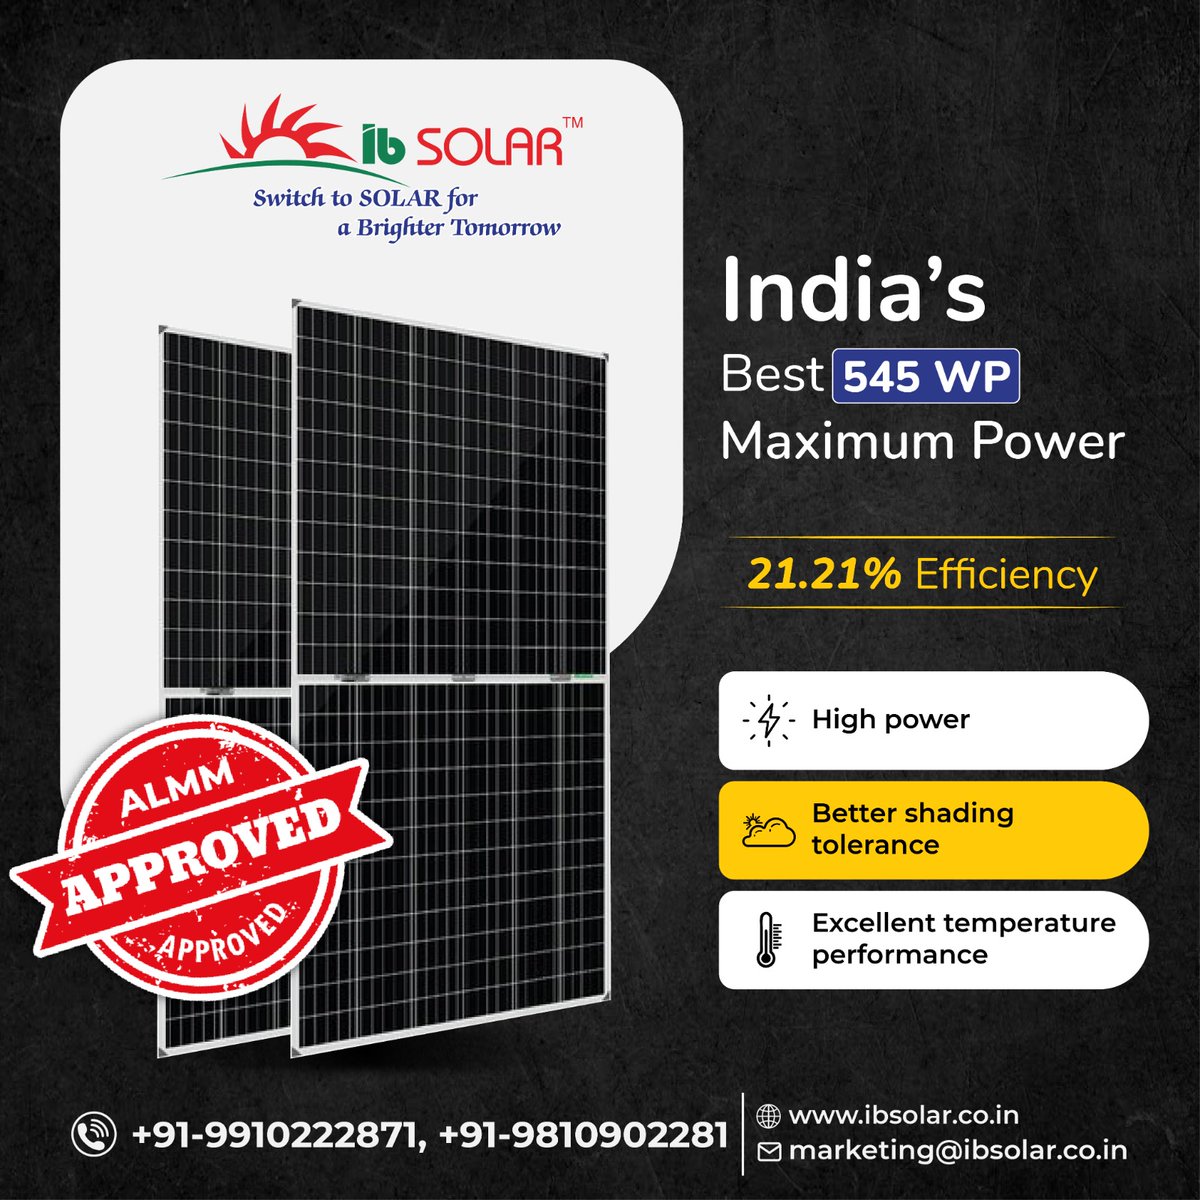 545WP maximum power output, unrivaled high power, and exceptional temperature performance. 

Visit our products : ibsolar.co.in/solar_panels.p…
Or call us at +919910222871, + 9810902281

#energyefficiency #sustainableliving #sustainableenergy #solarpanel #ibsolar #solarindia